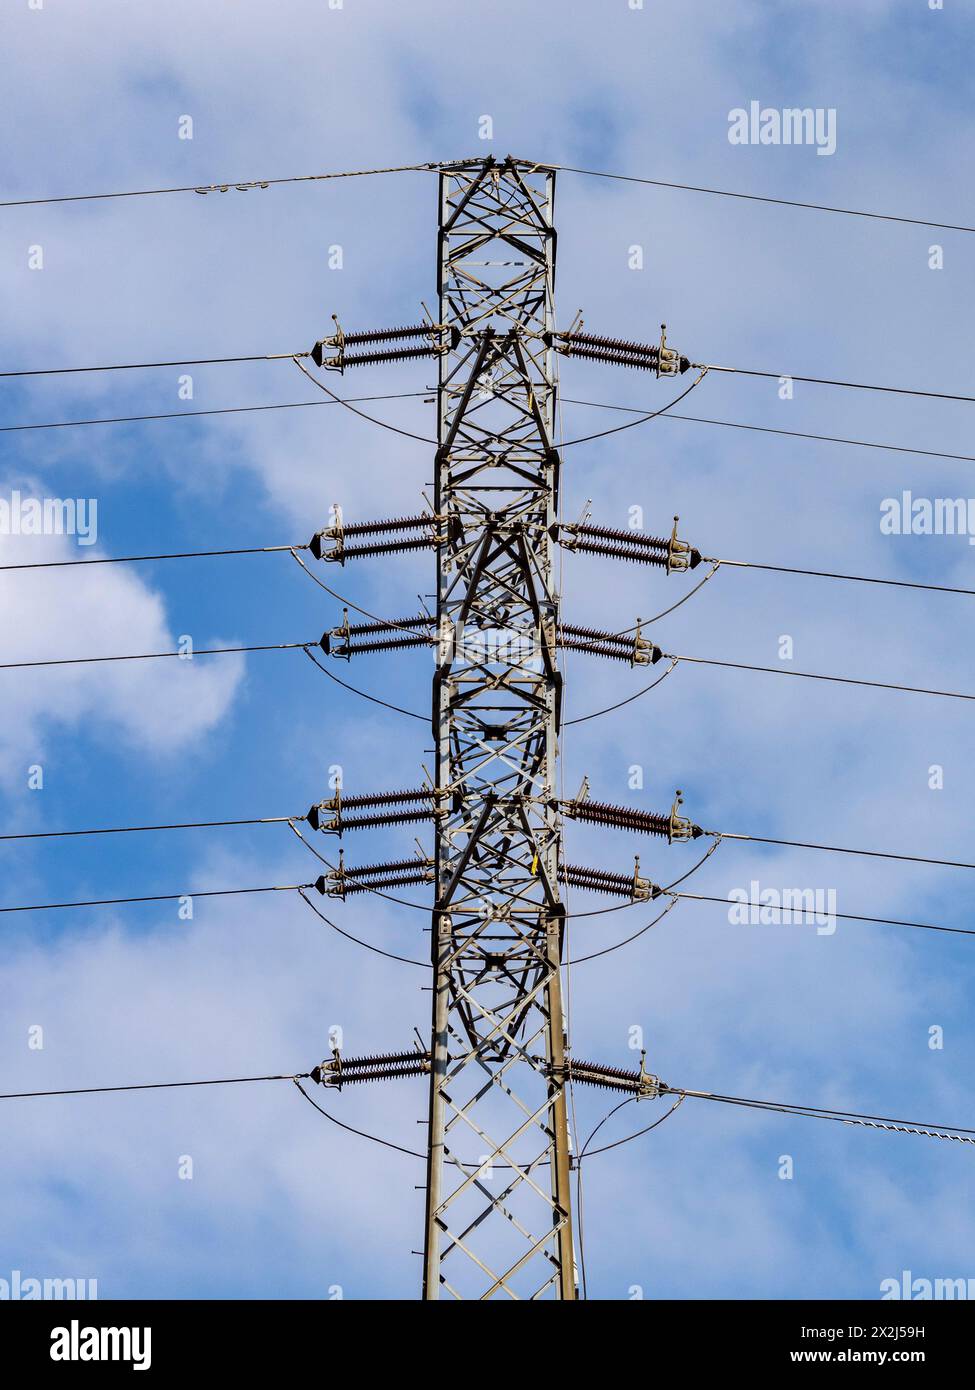 A high-voltage transmission pole with visible wires and insulators against a blue, slightly cloudy sky. Power lines, strategic infrastructure. Stock Photo